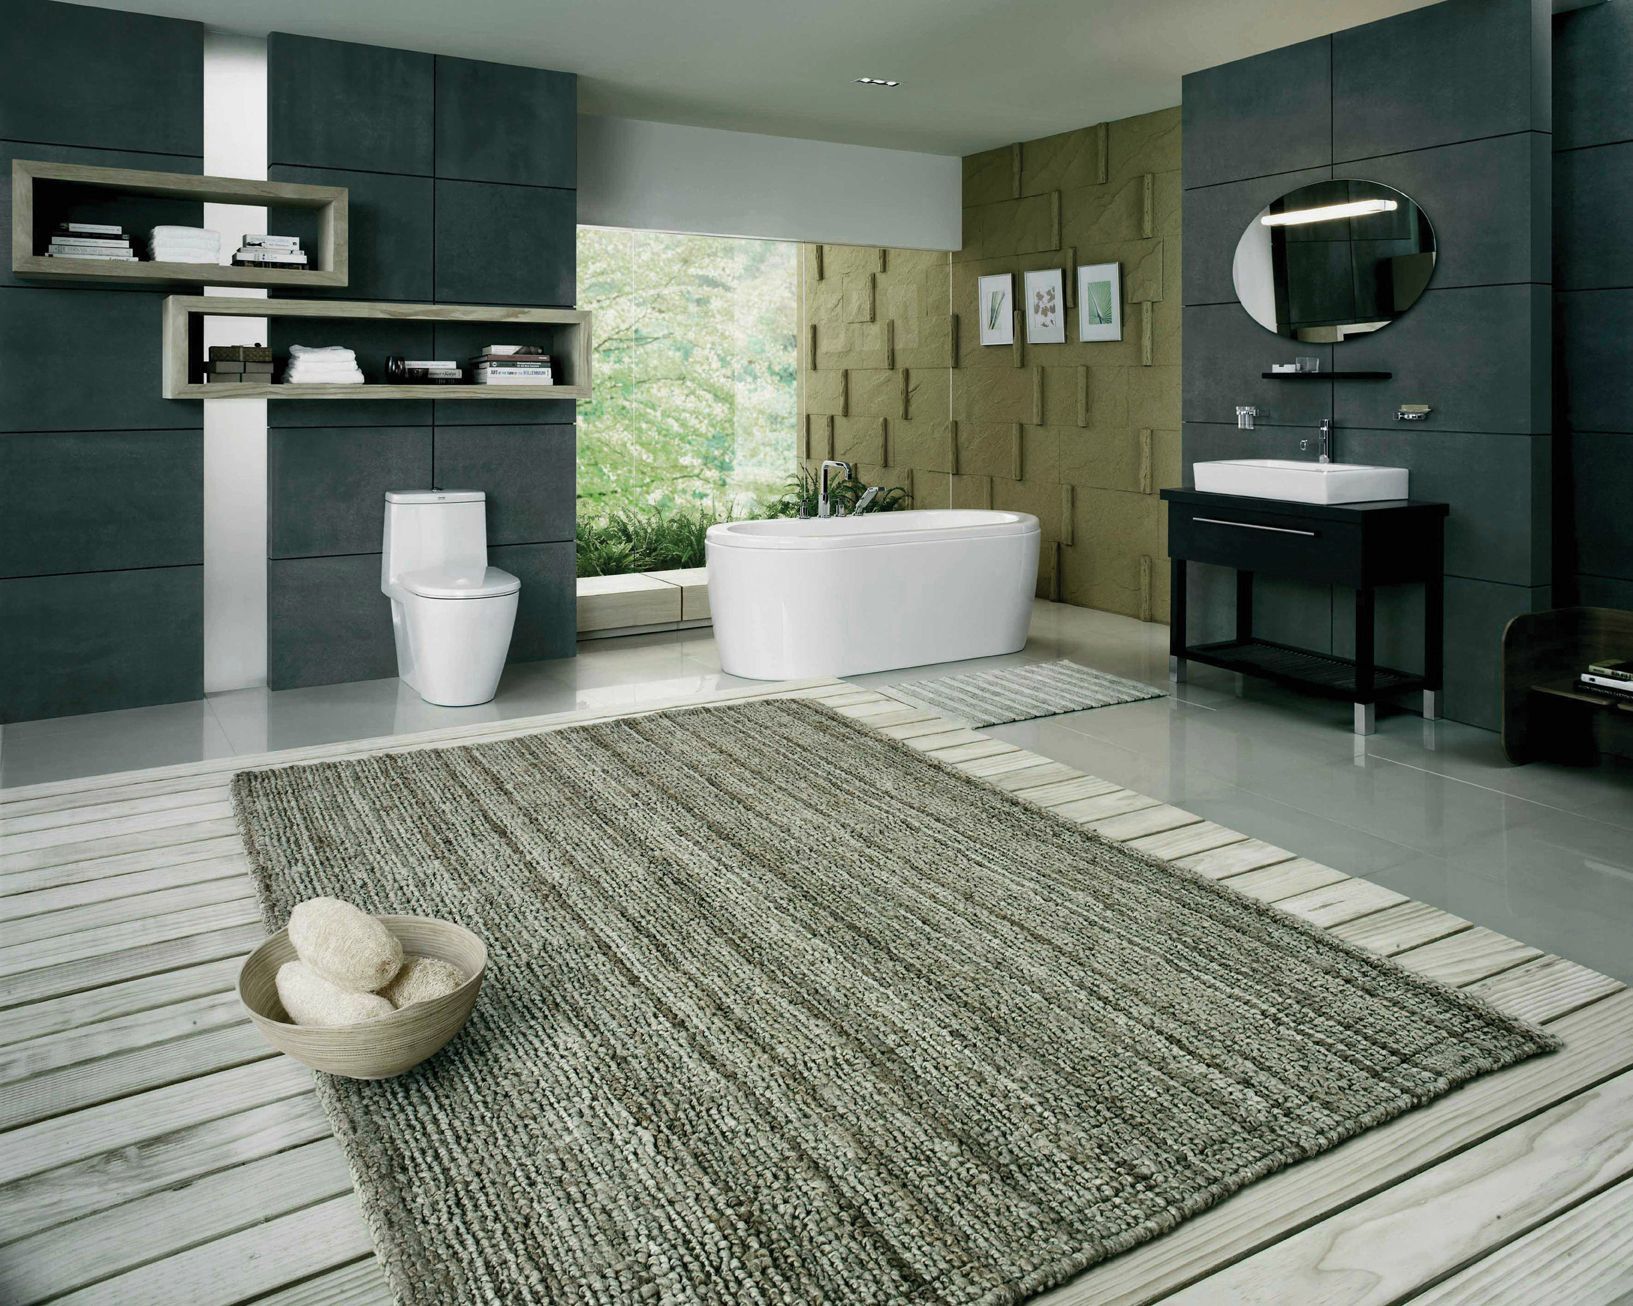 Designer Bathroom Rugs And Mats Within Finest Bathroom Grey Shag Large Bath Rugs For Modern Bathroom Floor Design On Designer Bathroom Rugs And Mats - Home Improvement